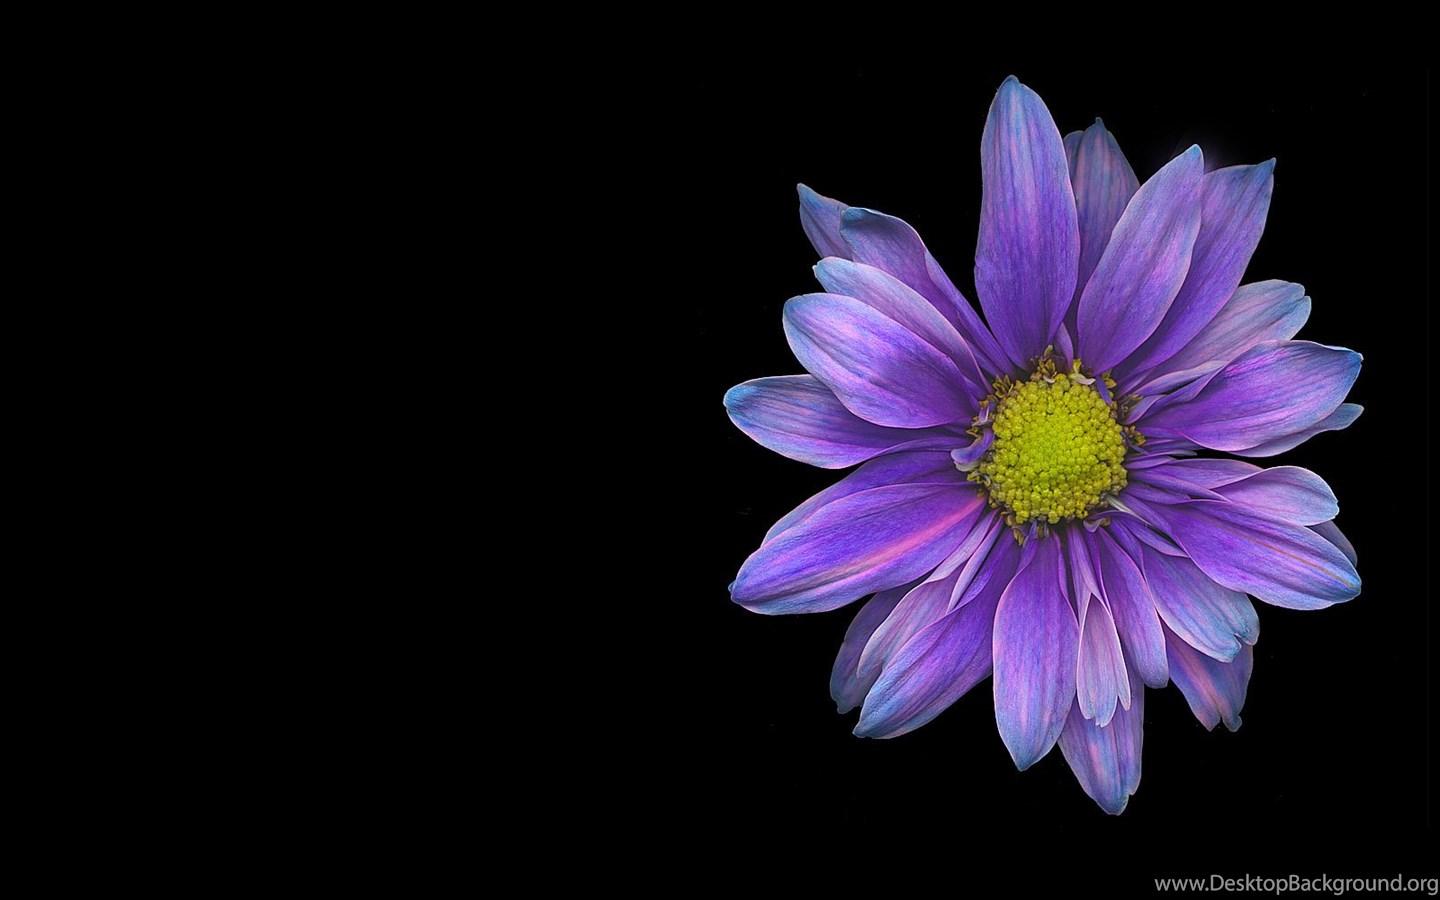 Black Daisy Flower Wallpapers - Top Free Black Daisy Flower Backgrounds ...